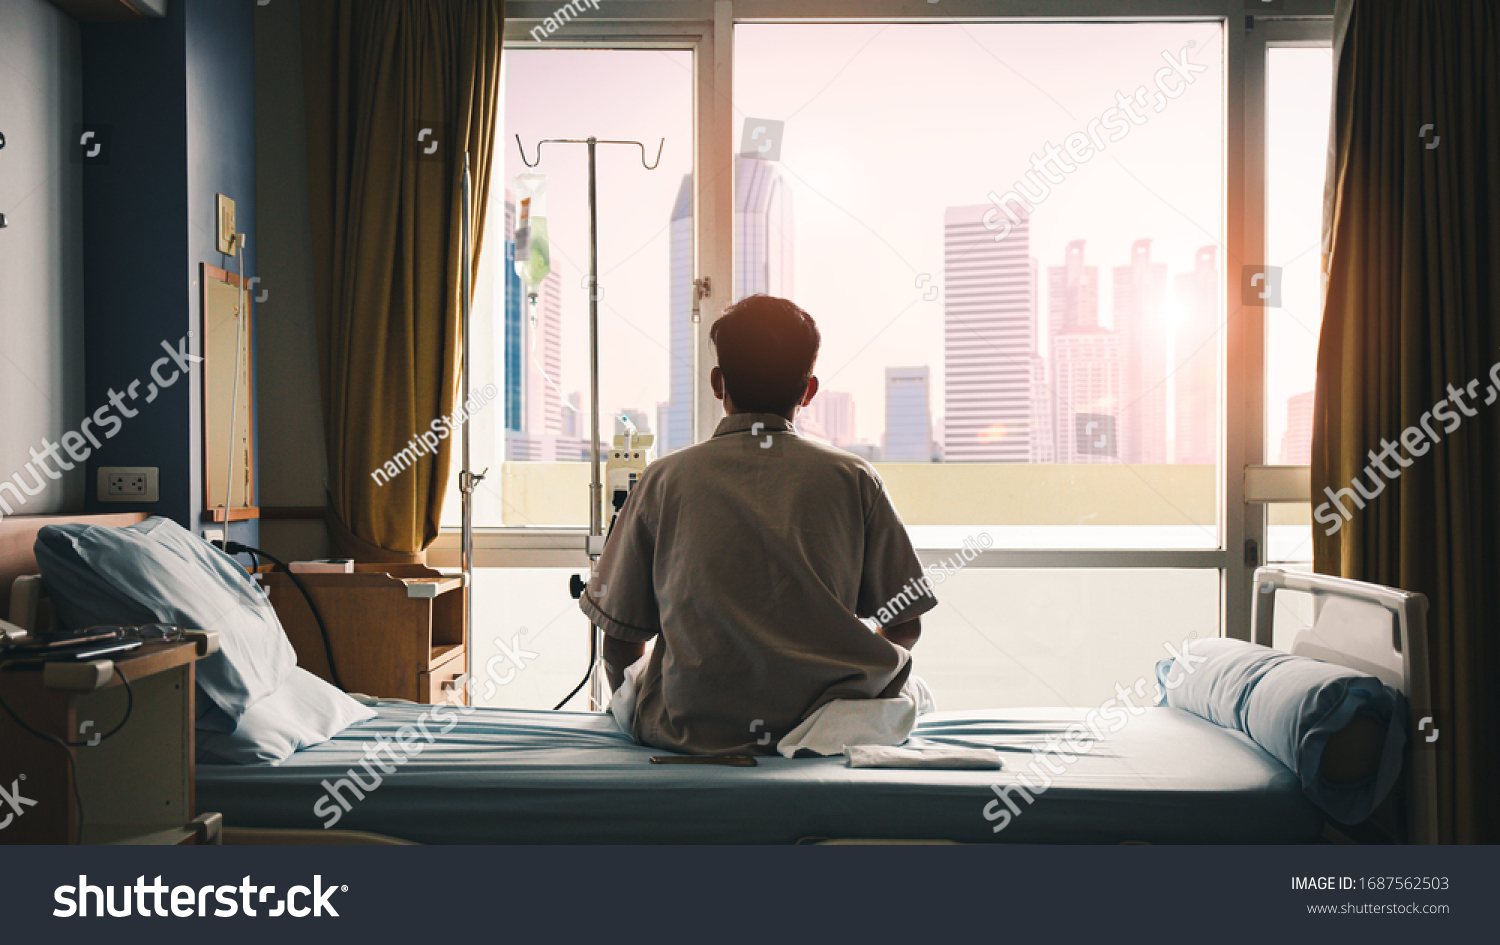 patient sat on the bed and looked out the window in the hospital alone and had stress, boredom, loneliness, anxiety. / Health care and medical #1687562503